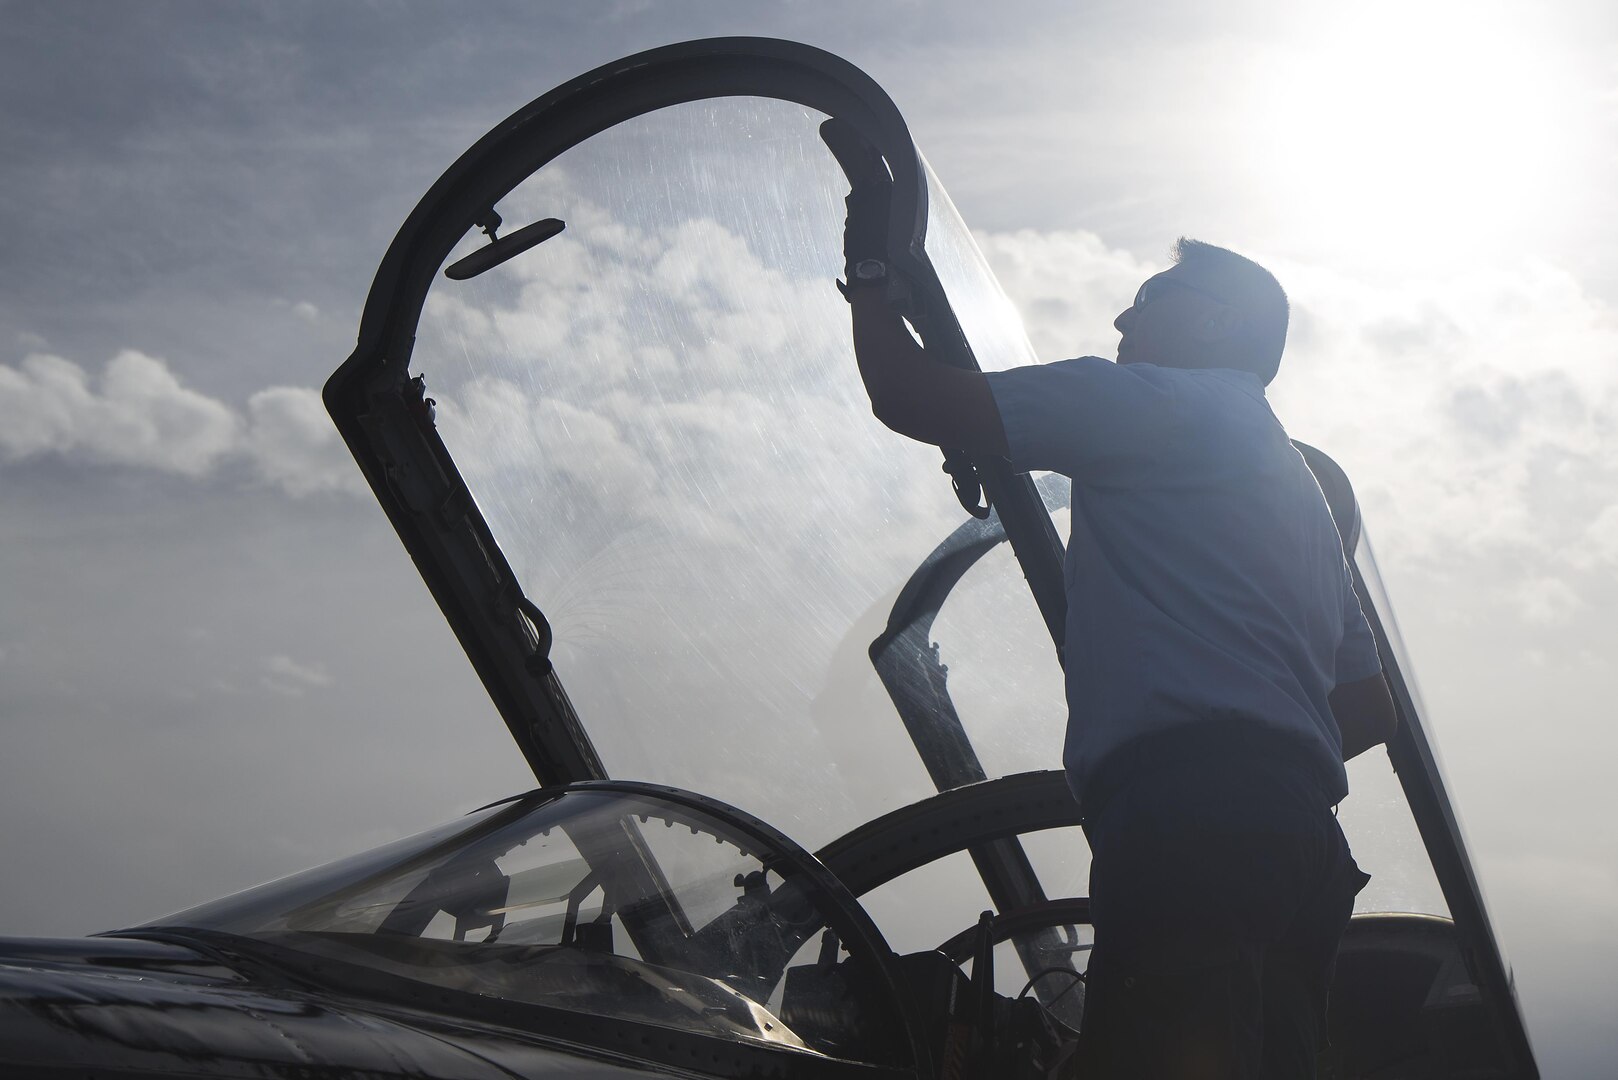 Chris Bahe, 12th Flying Training Wing T-38C Talon II crew chief, checks the canopy of a T-38C before it is cleared for flight at Joint Base San Antonio-Randolph Nov. 8, 2016. Bahe, who retired from the Navy, has also worked on A-6 Intruders, P-3 Orions, F-14 Tomcats and F-18 Hornets. (U.S. Air Force photo by Airman 1st Class Lauren Ely/Released)